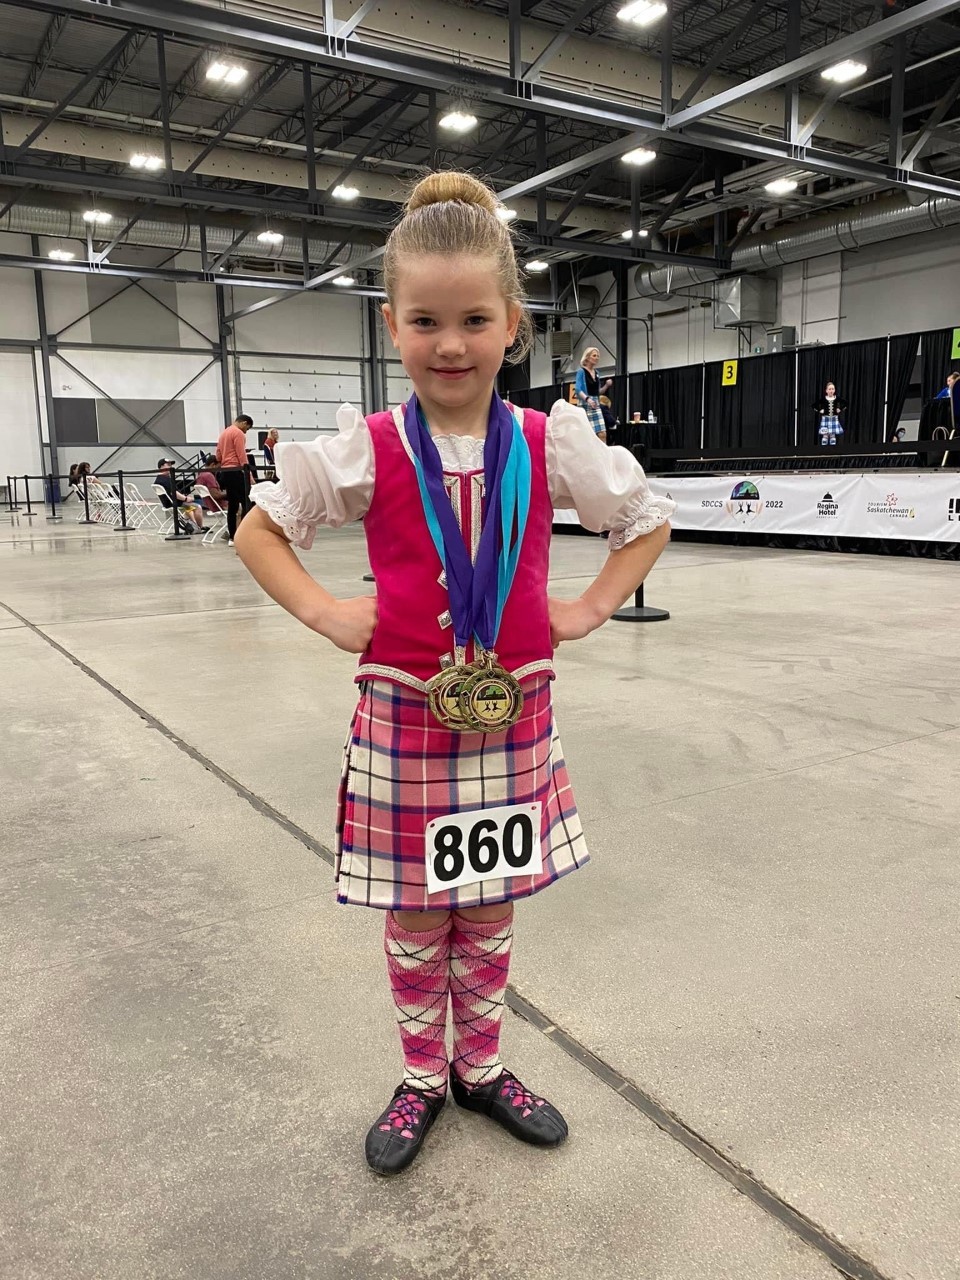 Six-year-old Olivia Moffat won eight medals - six gold and two bronze